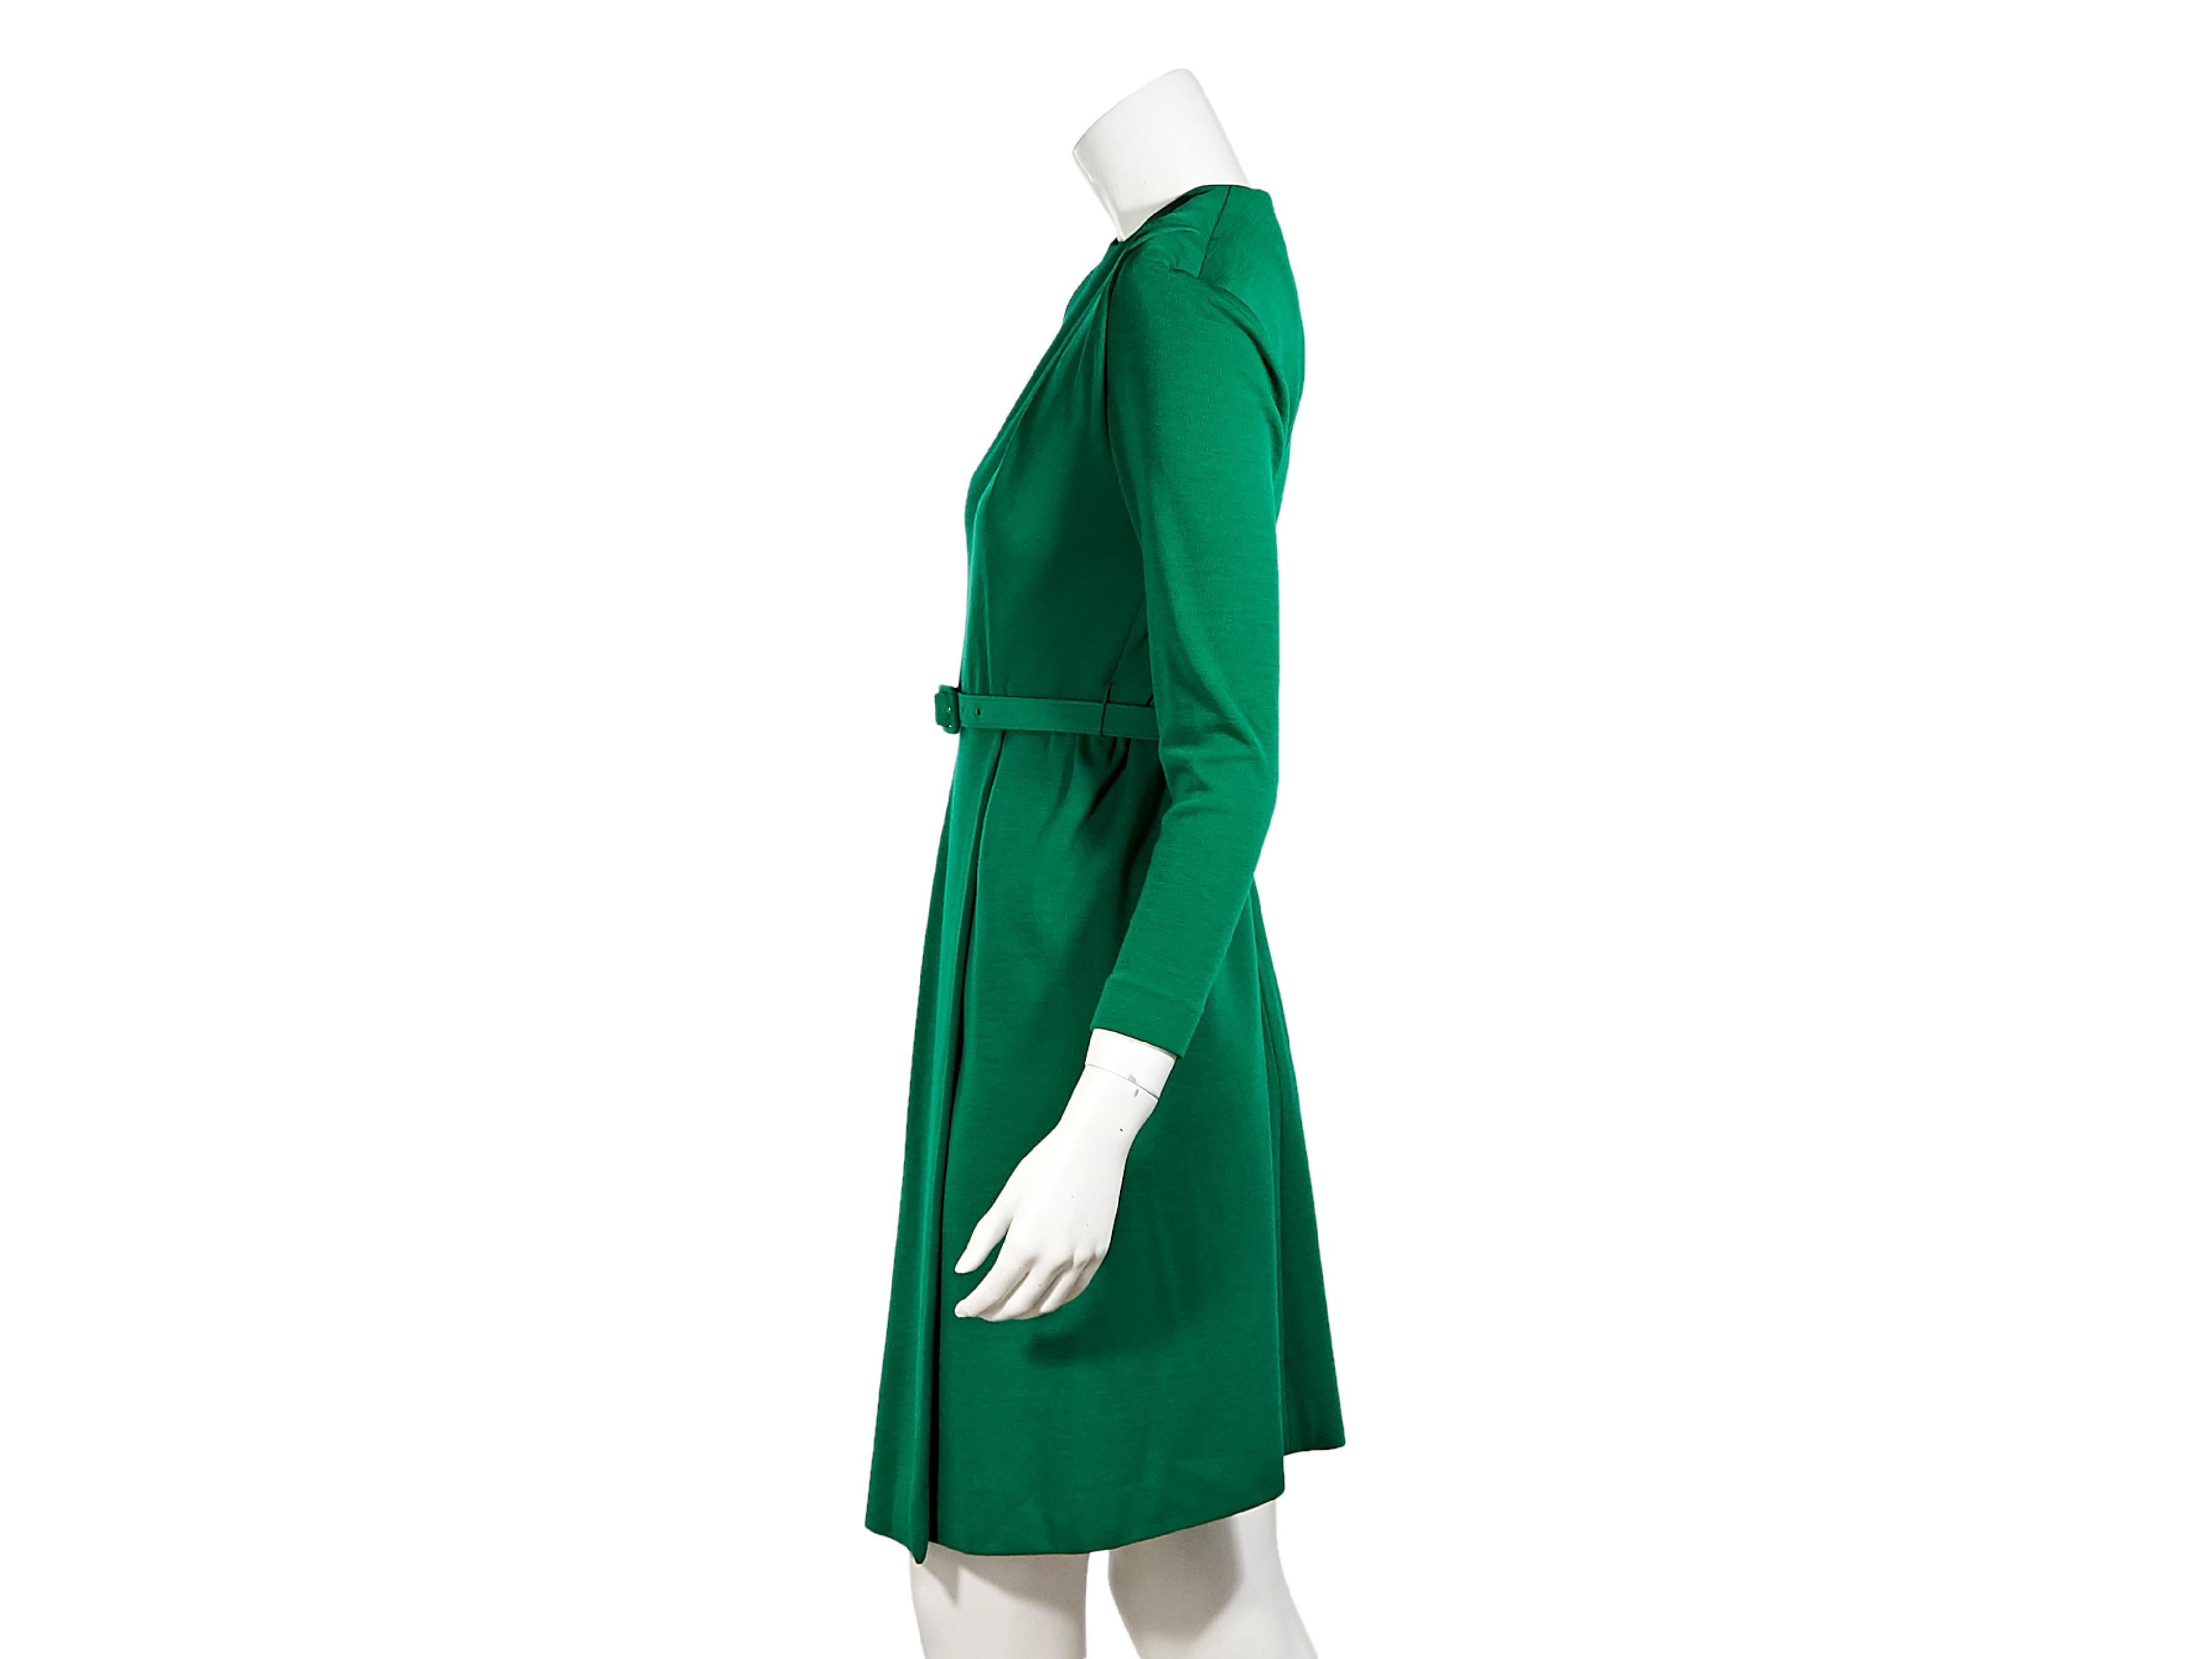 Product details:  Vintage green wool belted dress by Givenchy.  Circa the early 1980s.  Crewneck.  Bracelet-length sleeves.  Pleats taper off shoulder.  Adjustable belted waist.  Concealed back zip closure. 34